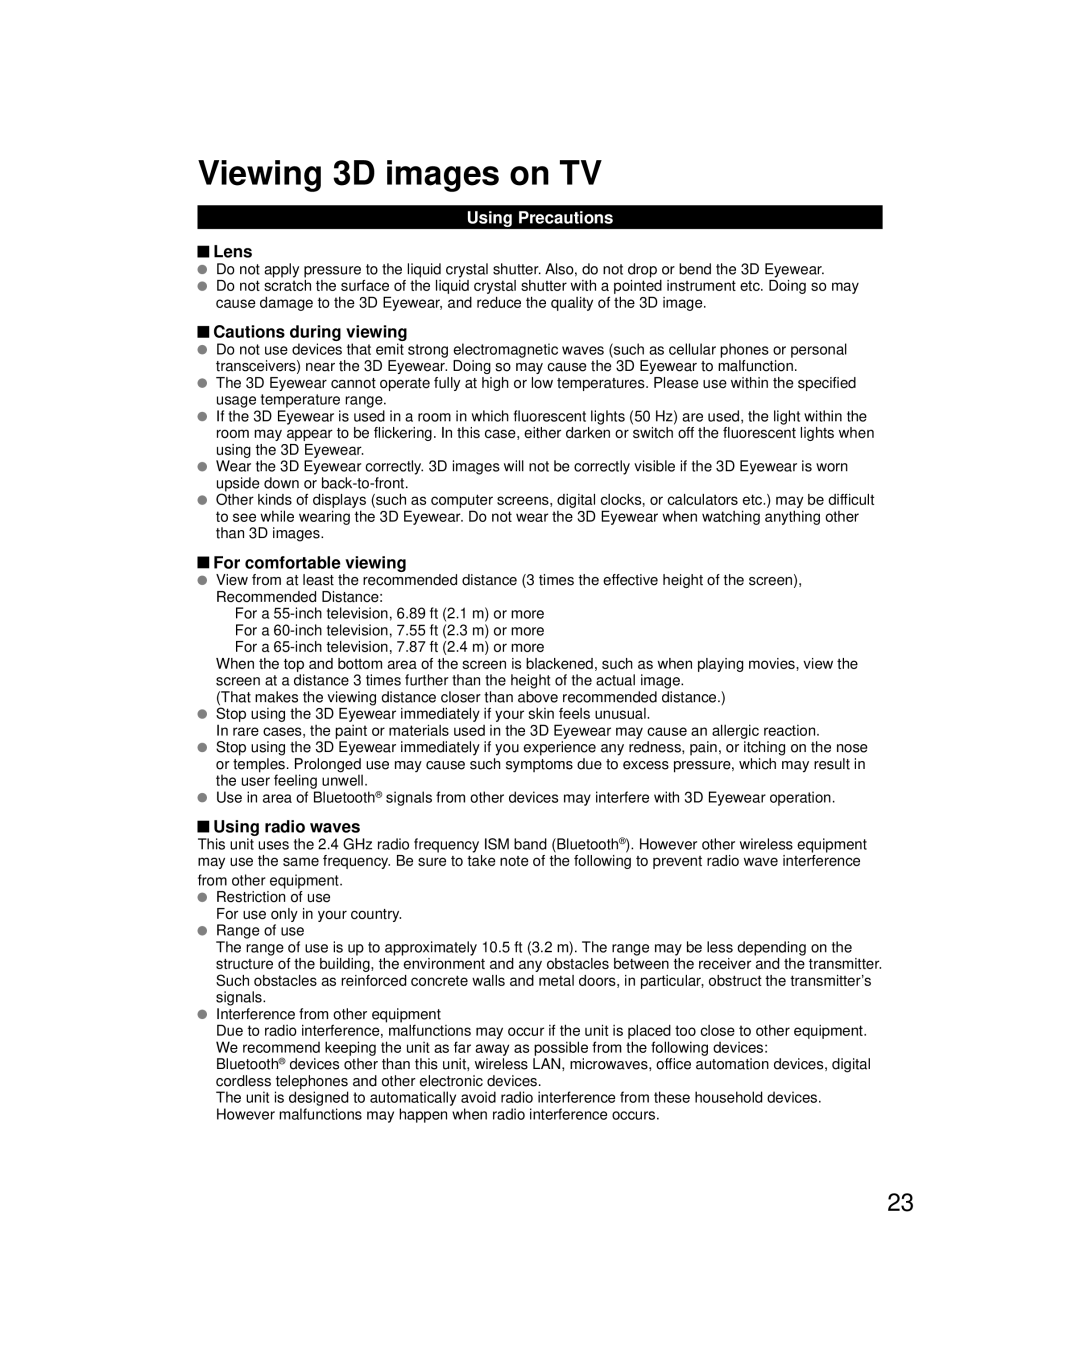 Panasonic TCP55VT60 Viewing 3D images on TV, Using Precautions, Lens, Cautions during viewing, For comfortable viewing 